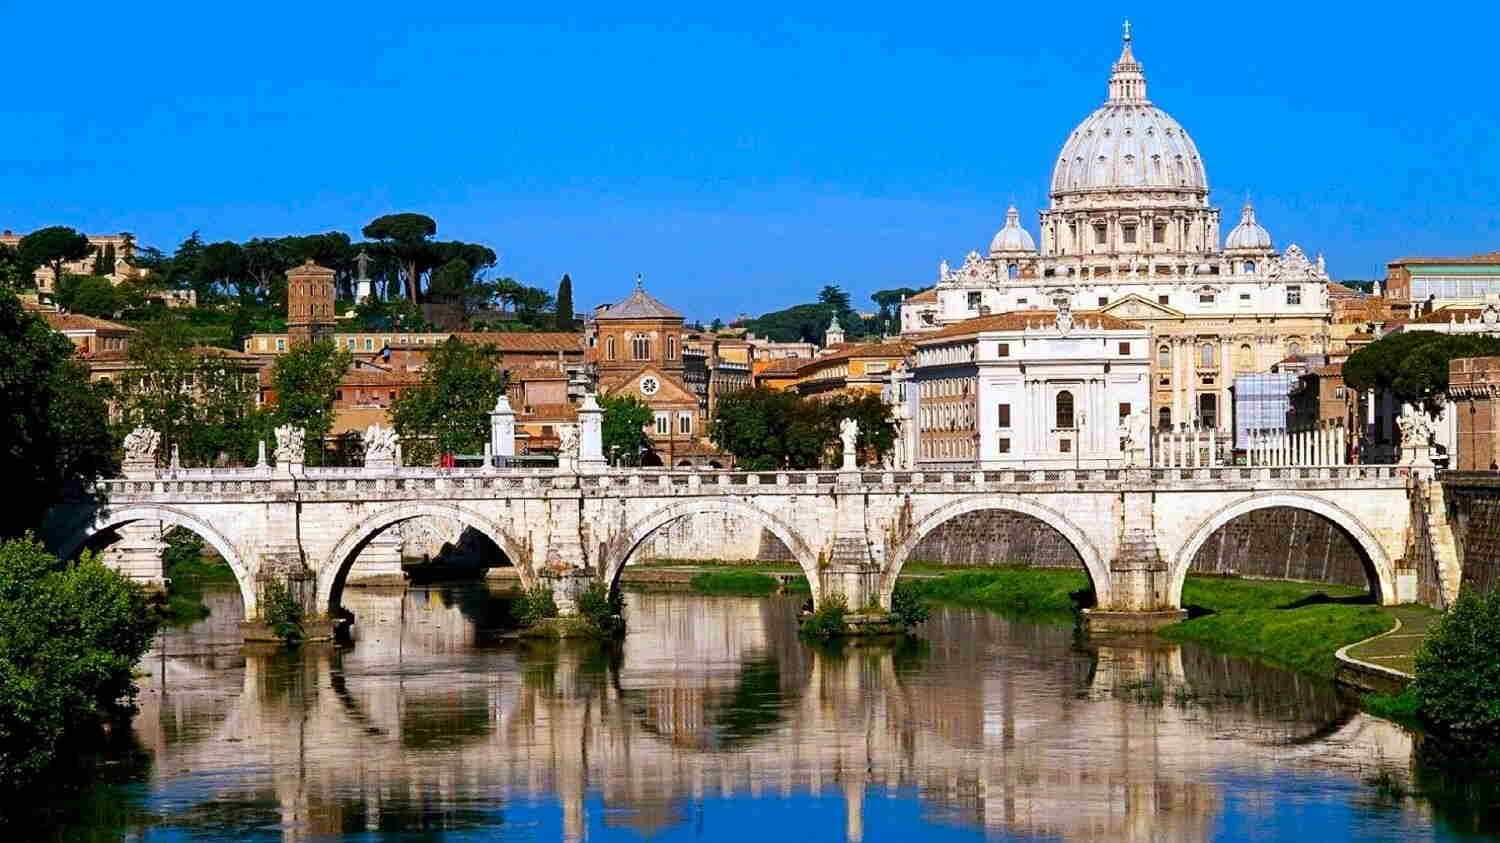 What is the best time of day to visit the Vatican?